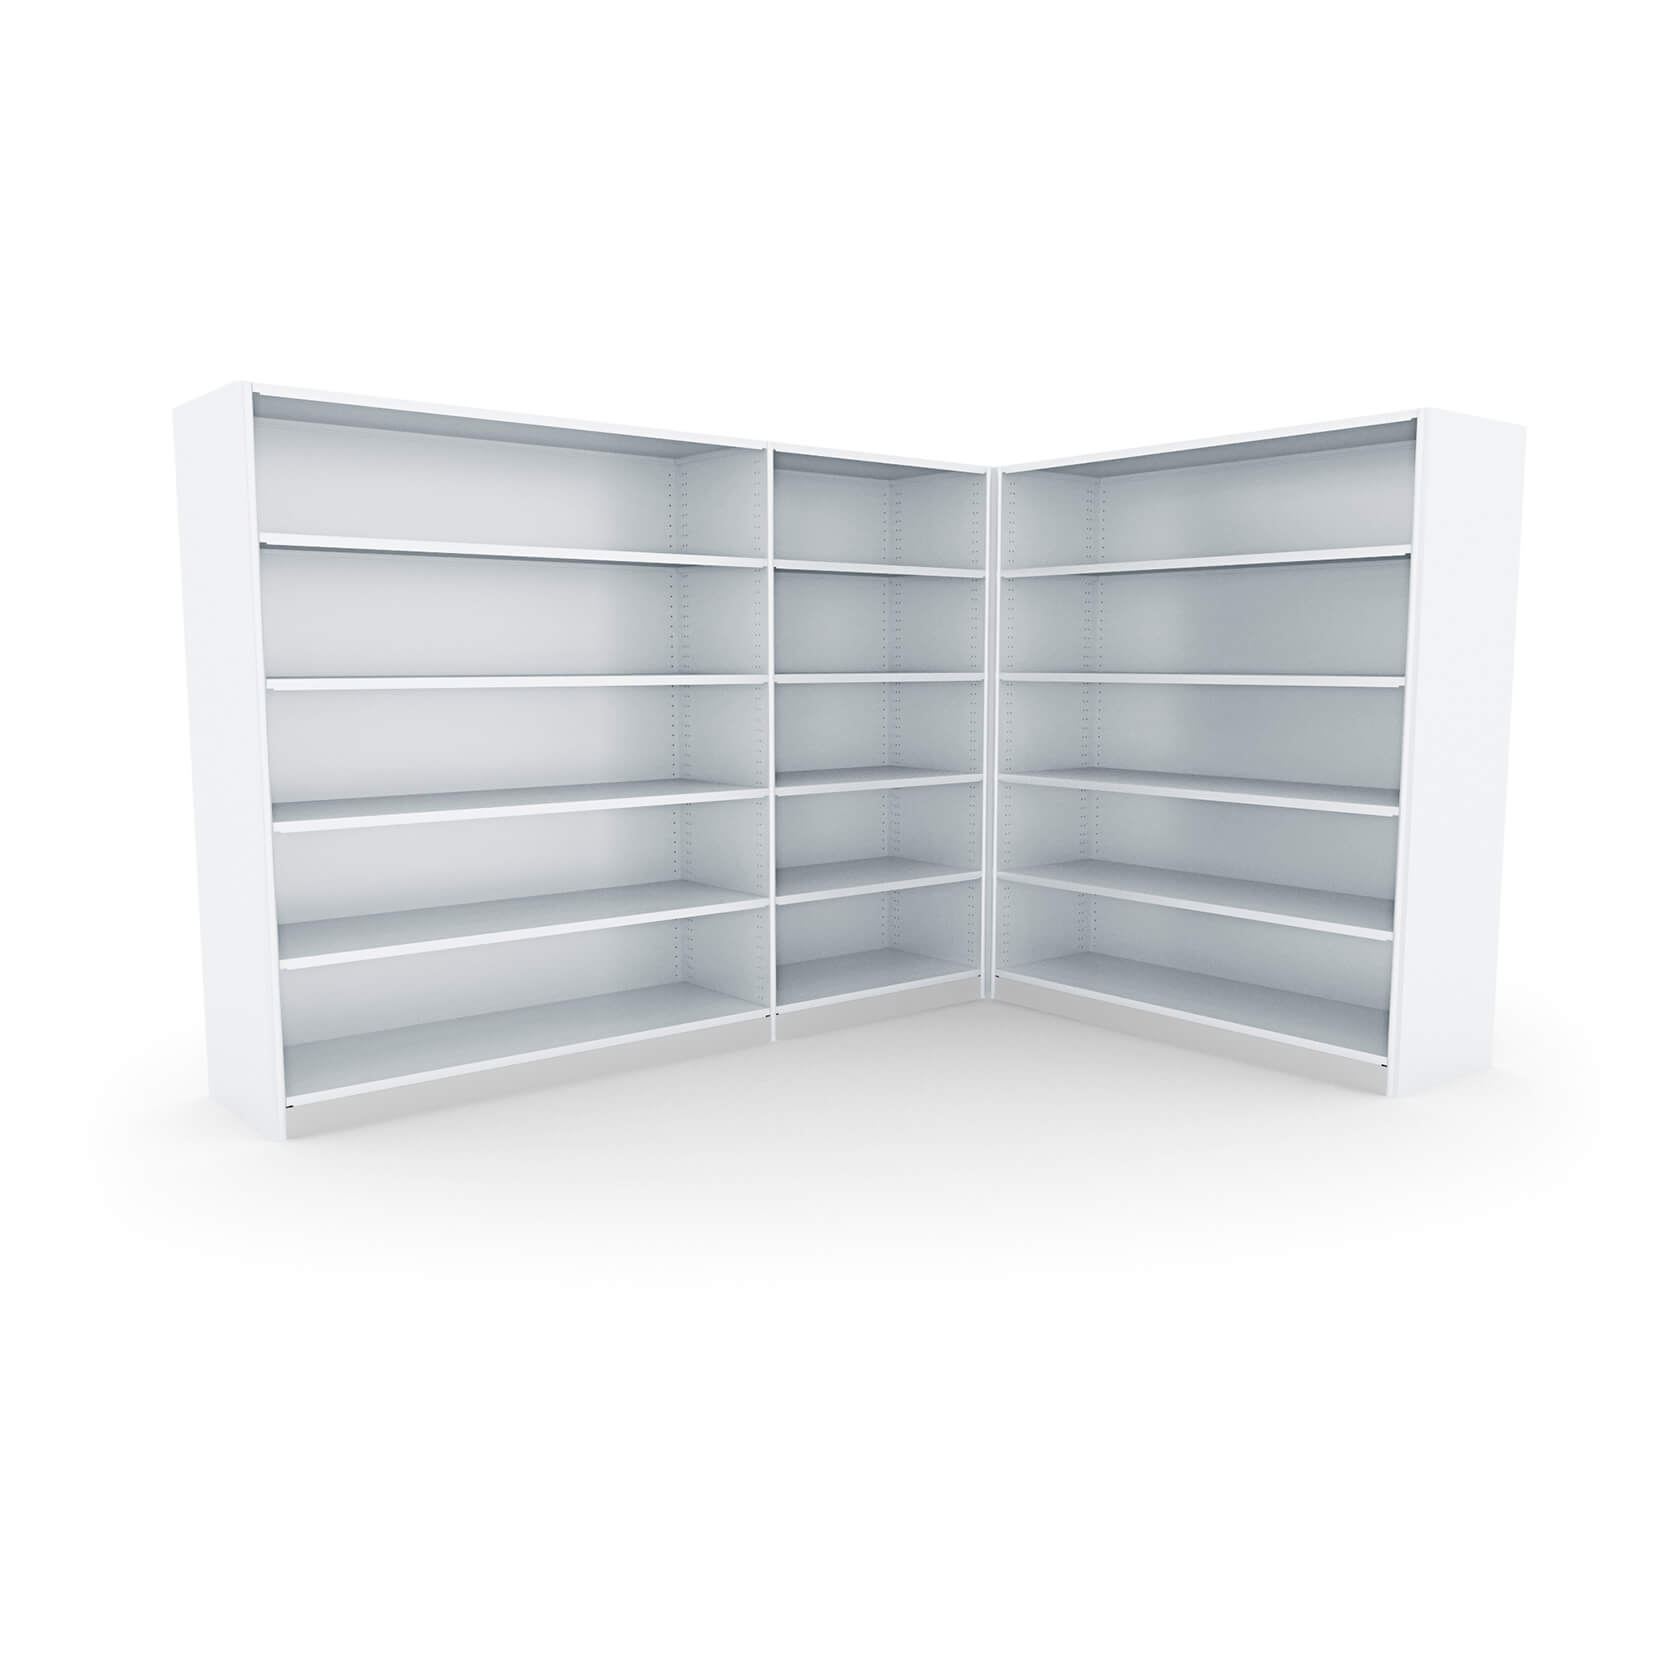 Rolled Post Shelving Profile Systems, Lozier Wide Span Shelving